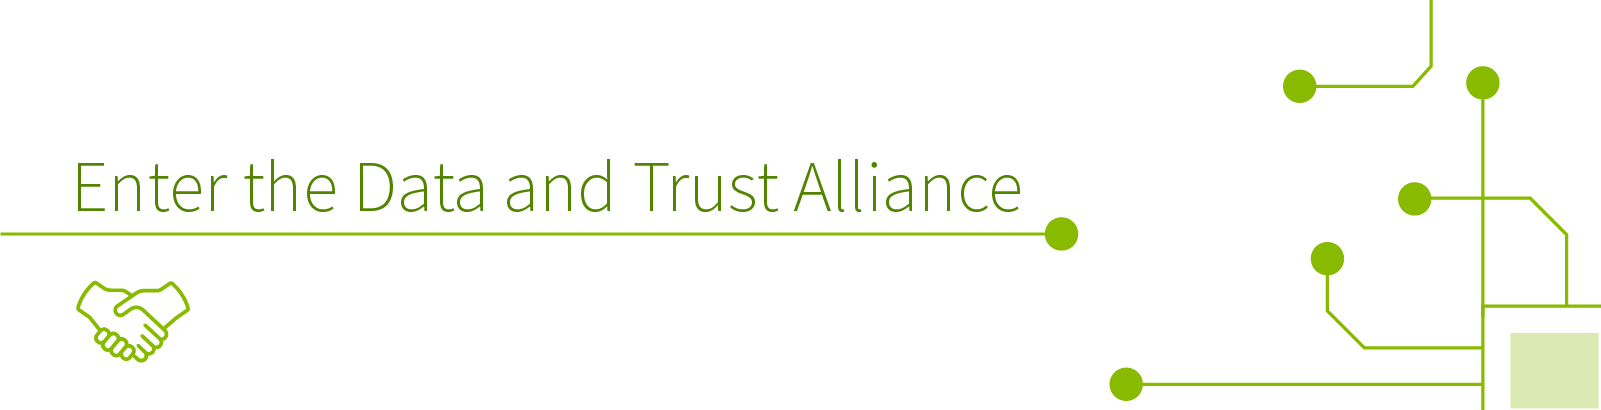 text that says enter the data and trust alliance, with an icon of two hands shaking. circuit board elements are in the corner of the graphic